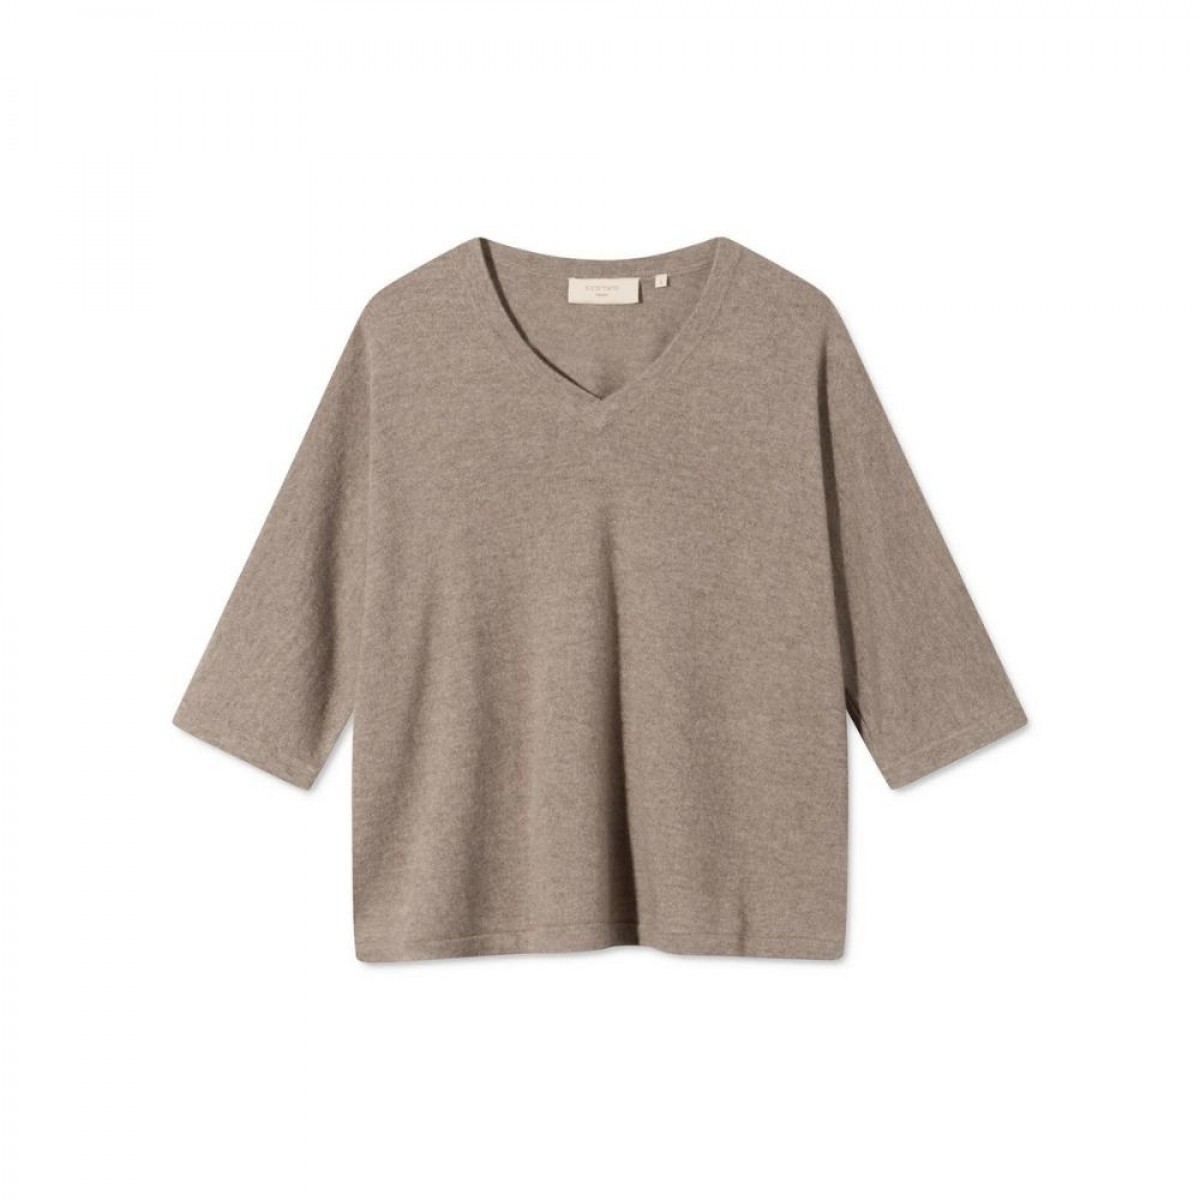 karin knit cashmere - brown - front